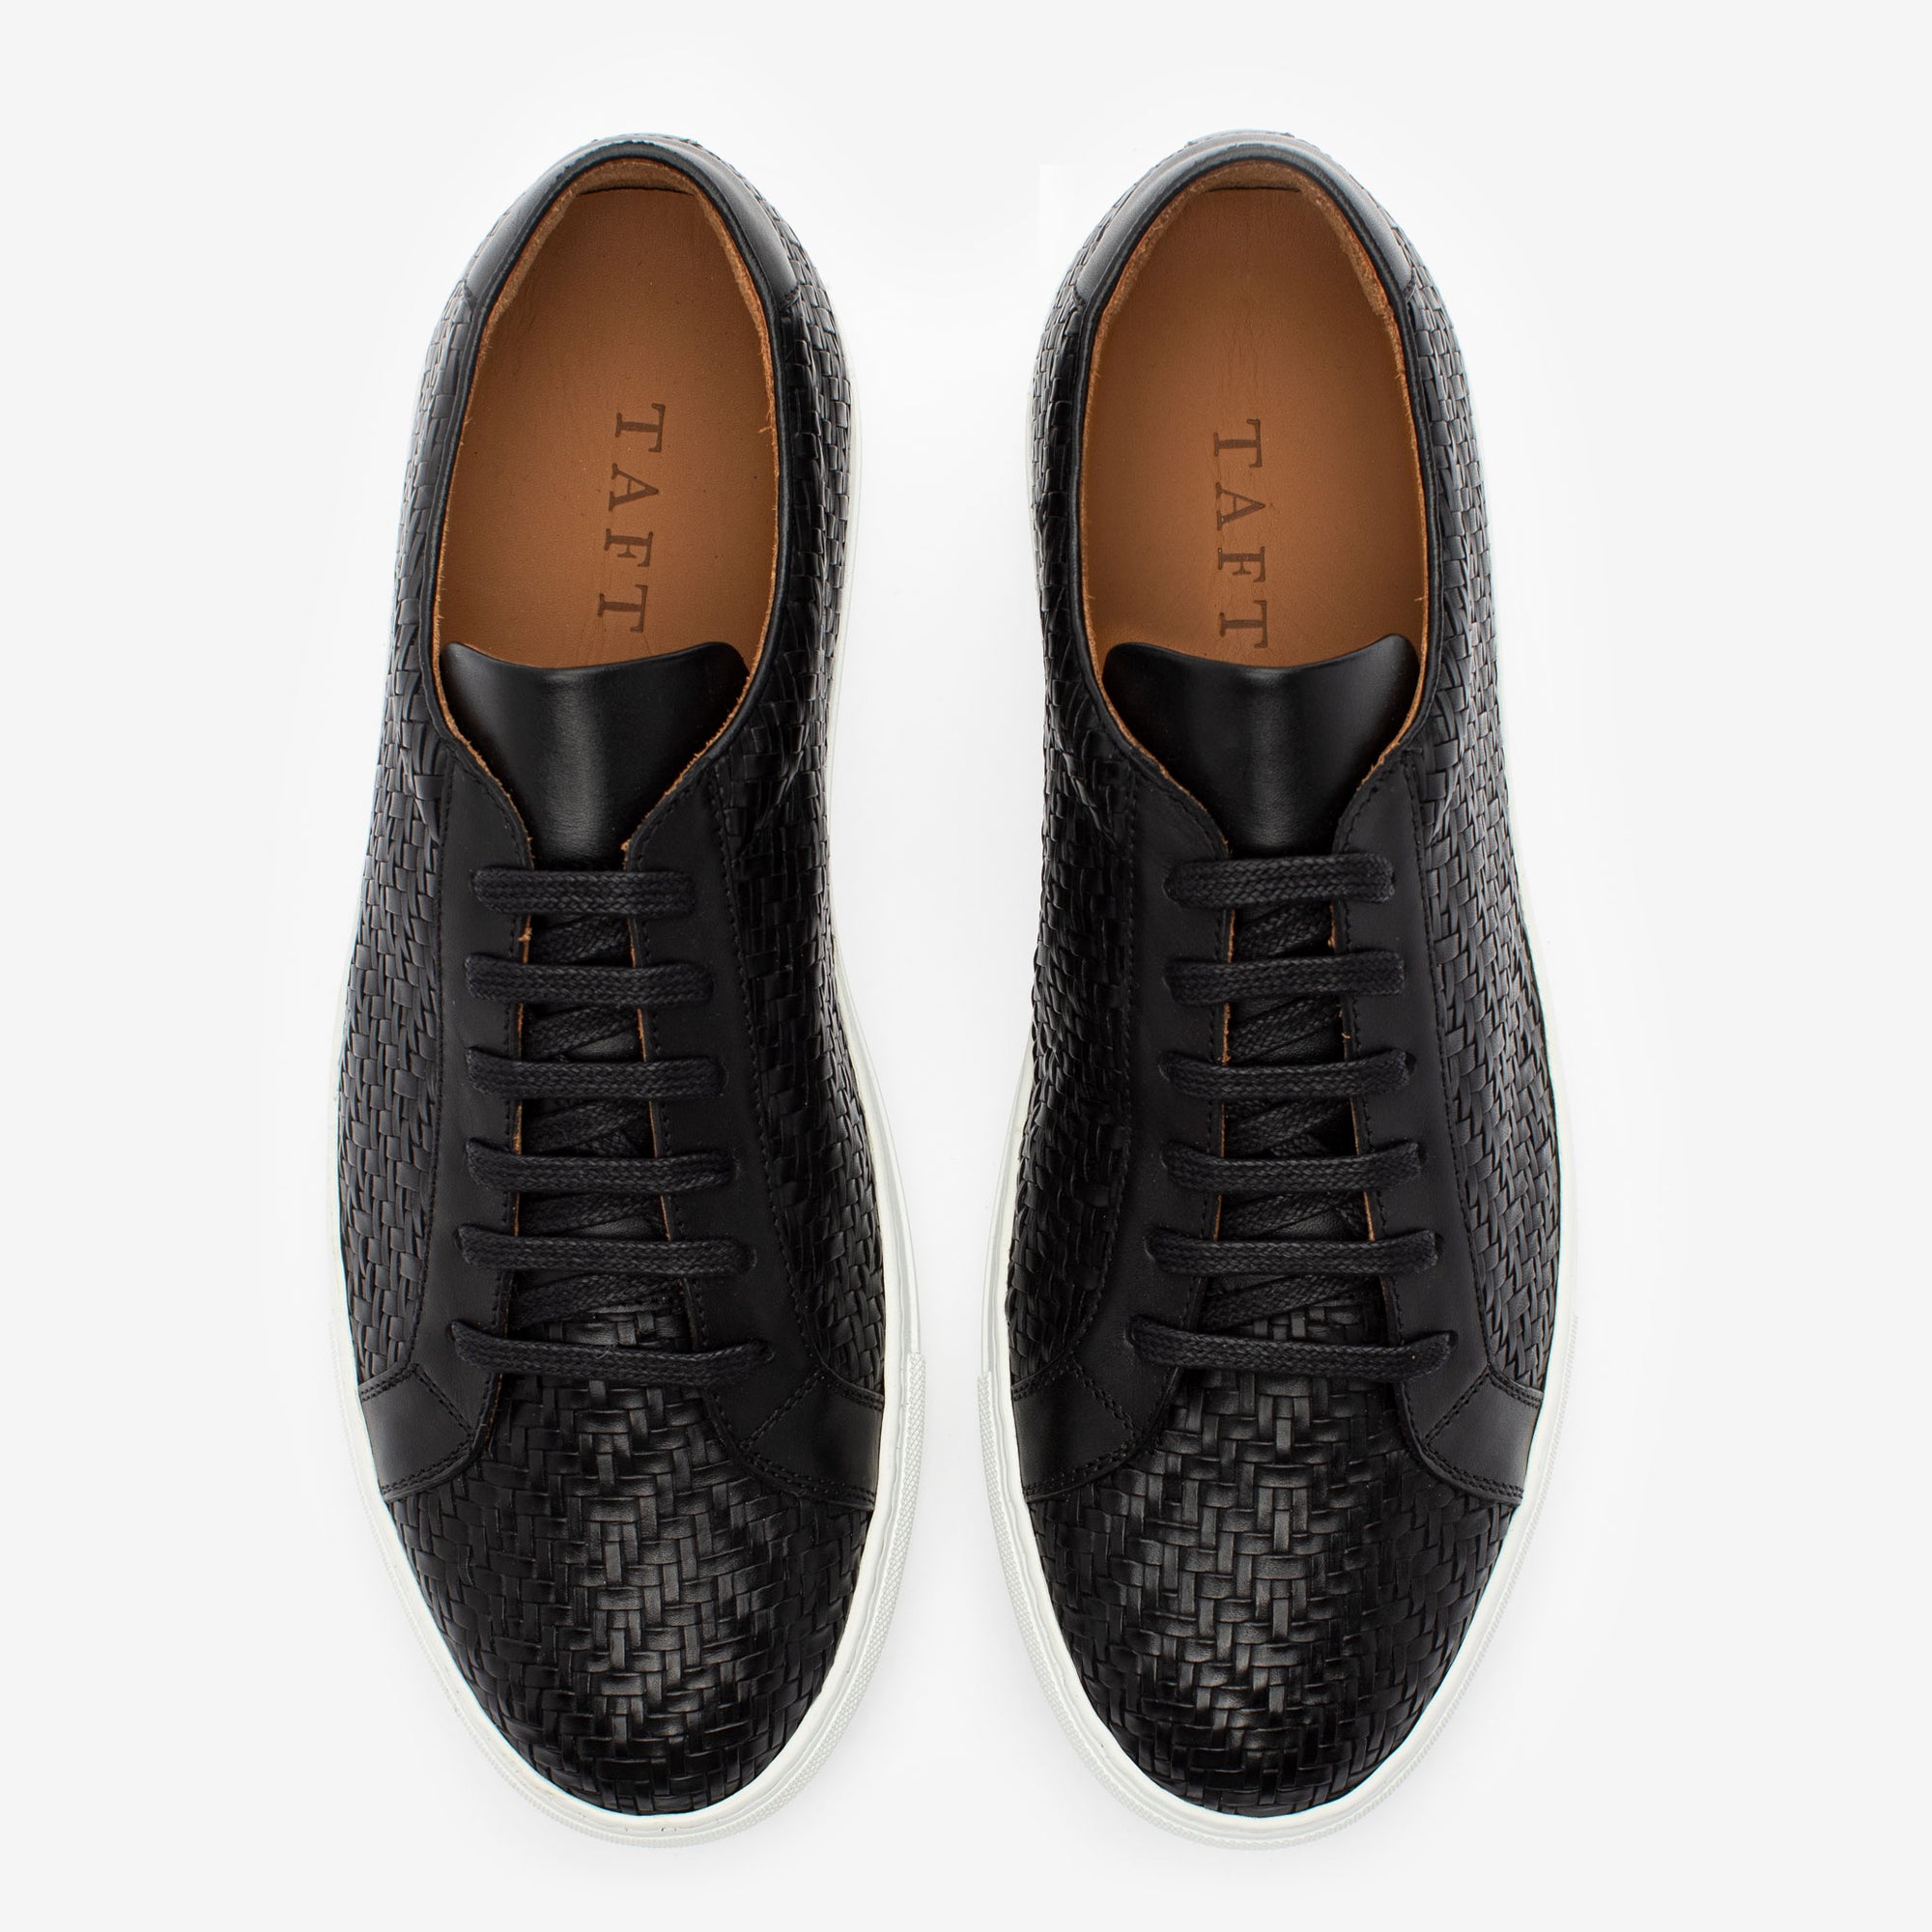 The Sneaker in Black Woven Top View